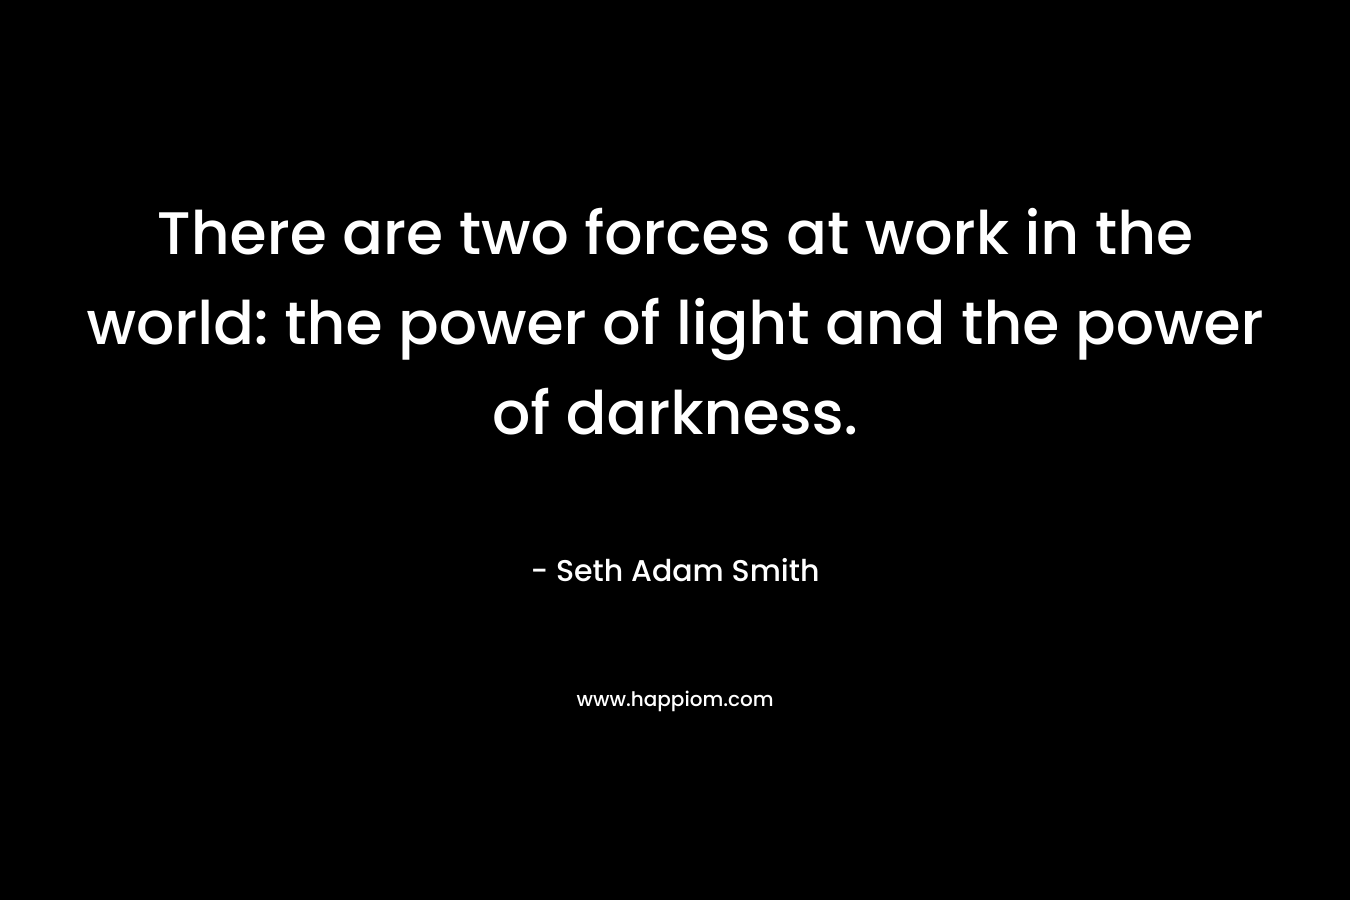 There are two forces at work in the world: the power of light and the power of darkness.